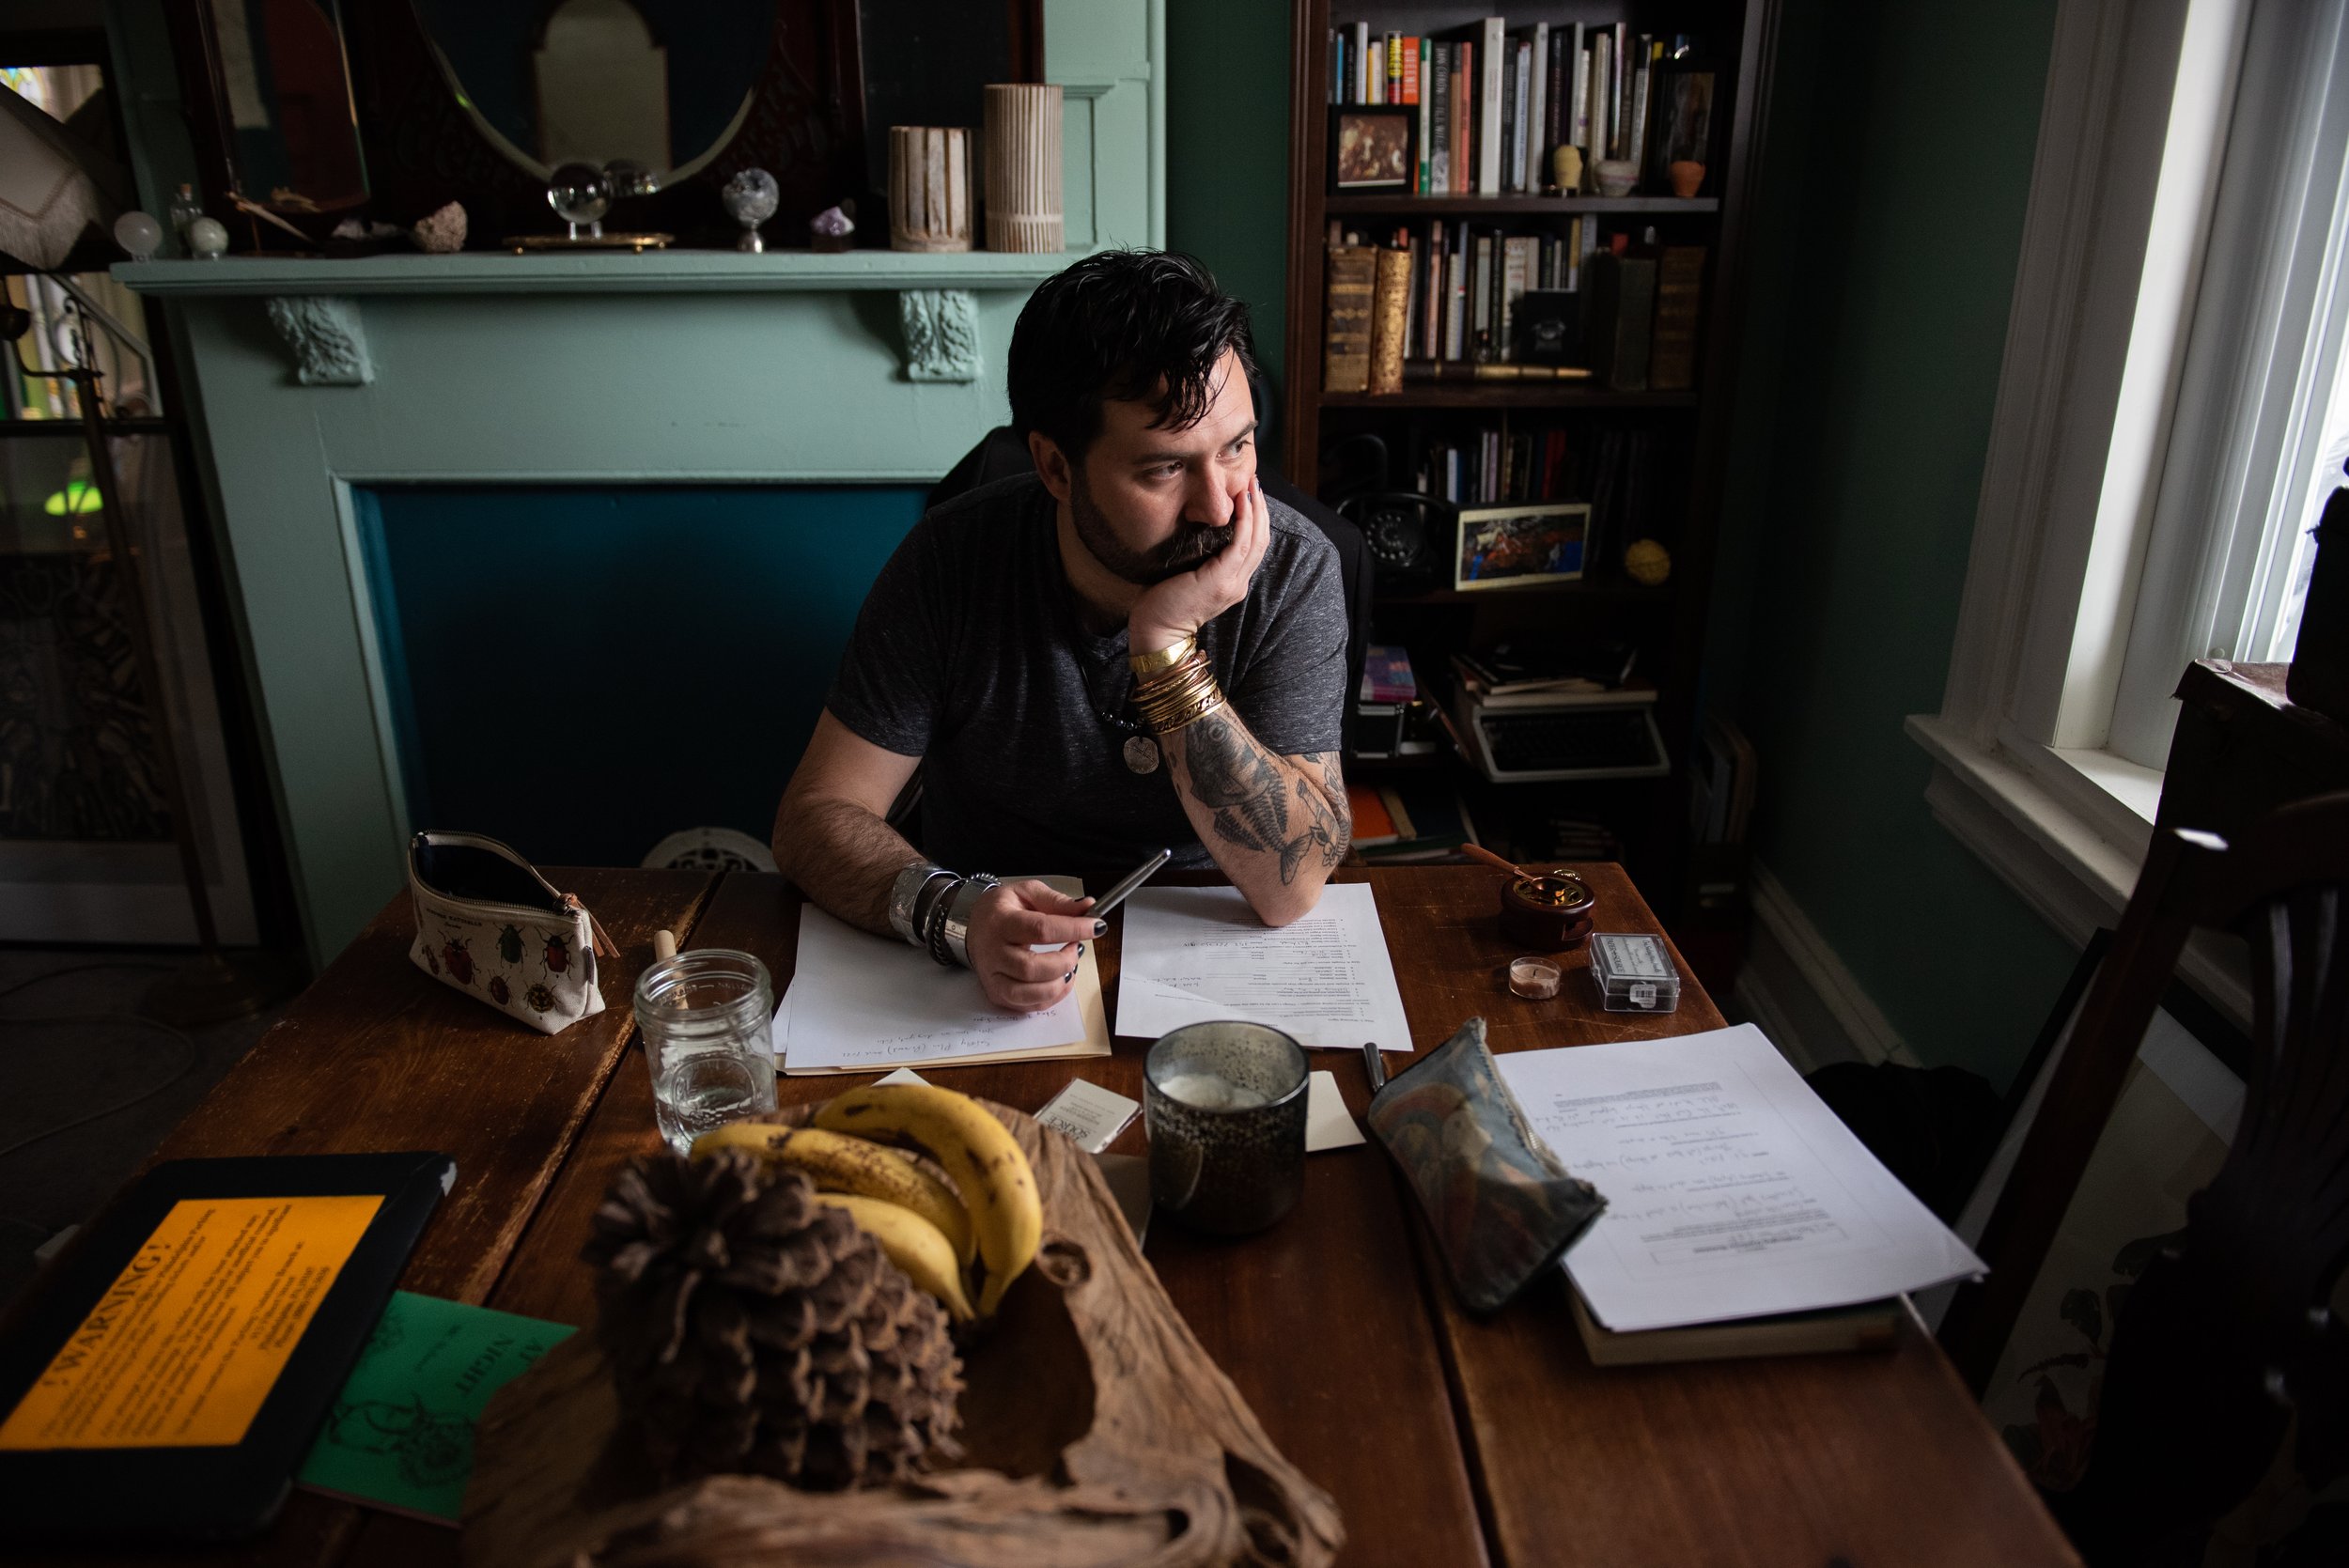   Carlos&nbsp;José&nbsp;Pérez Sámano, a writer and poet, takes time to himself to prepare for a therapy session at his home in West Philadelphia on Tuesday, April 5, 2022.  